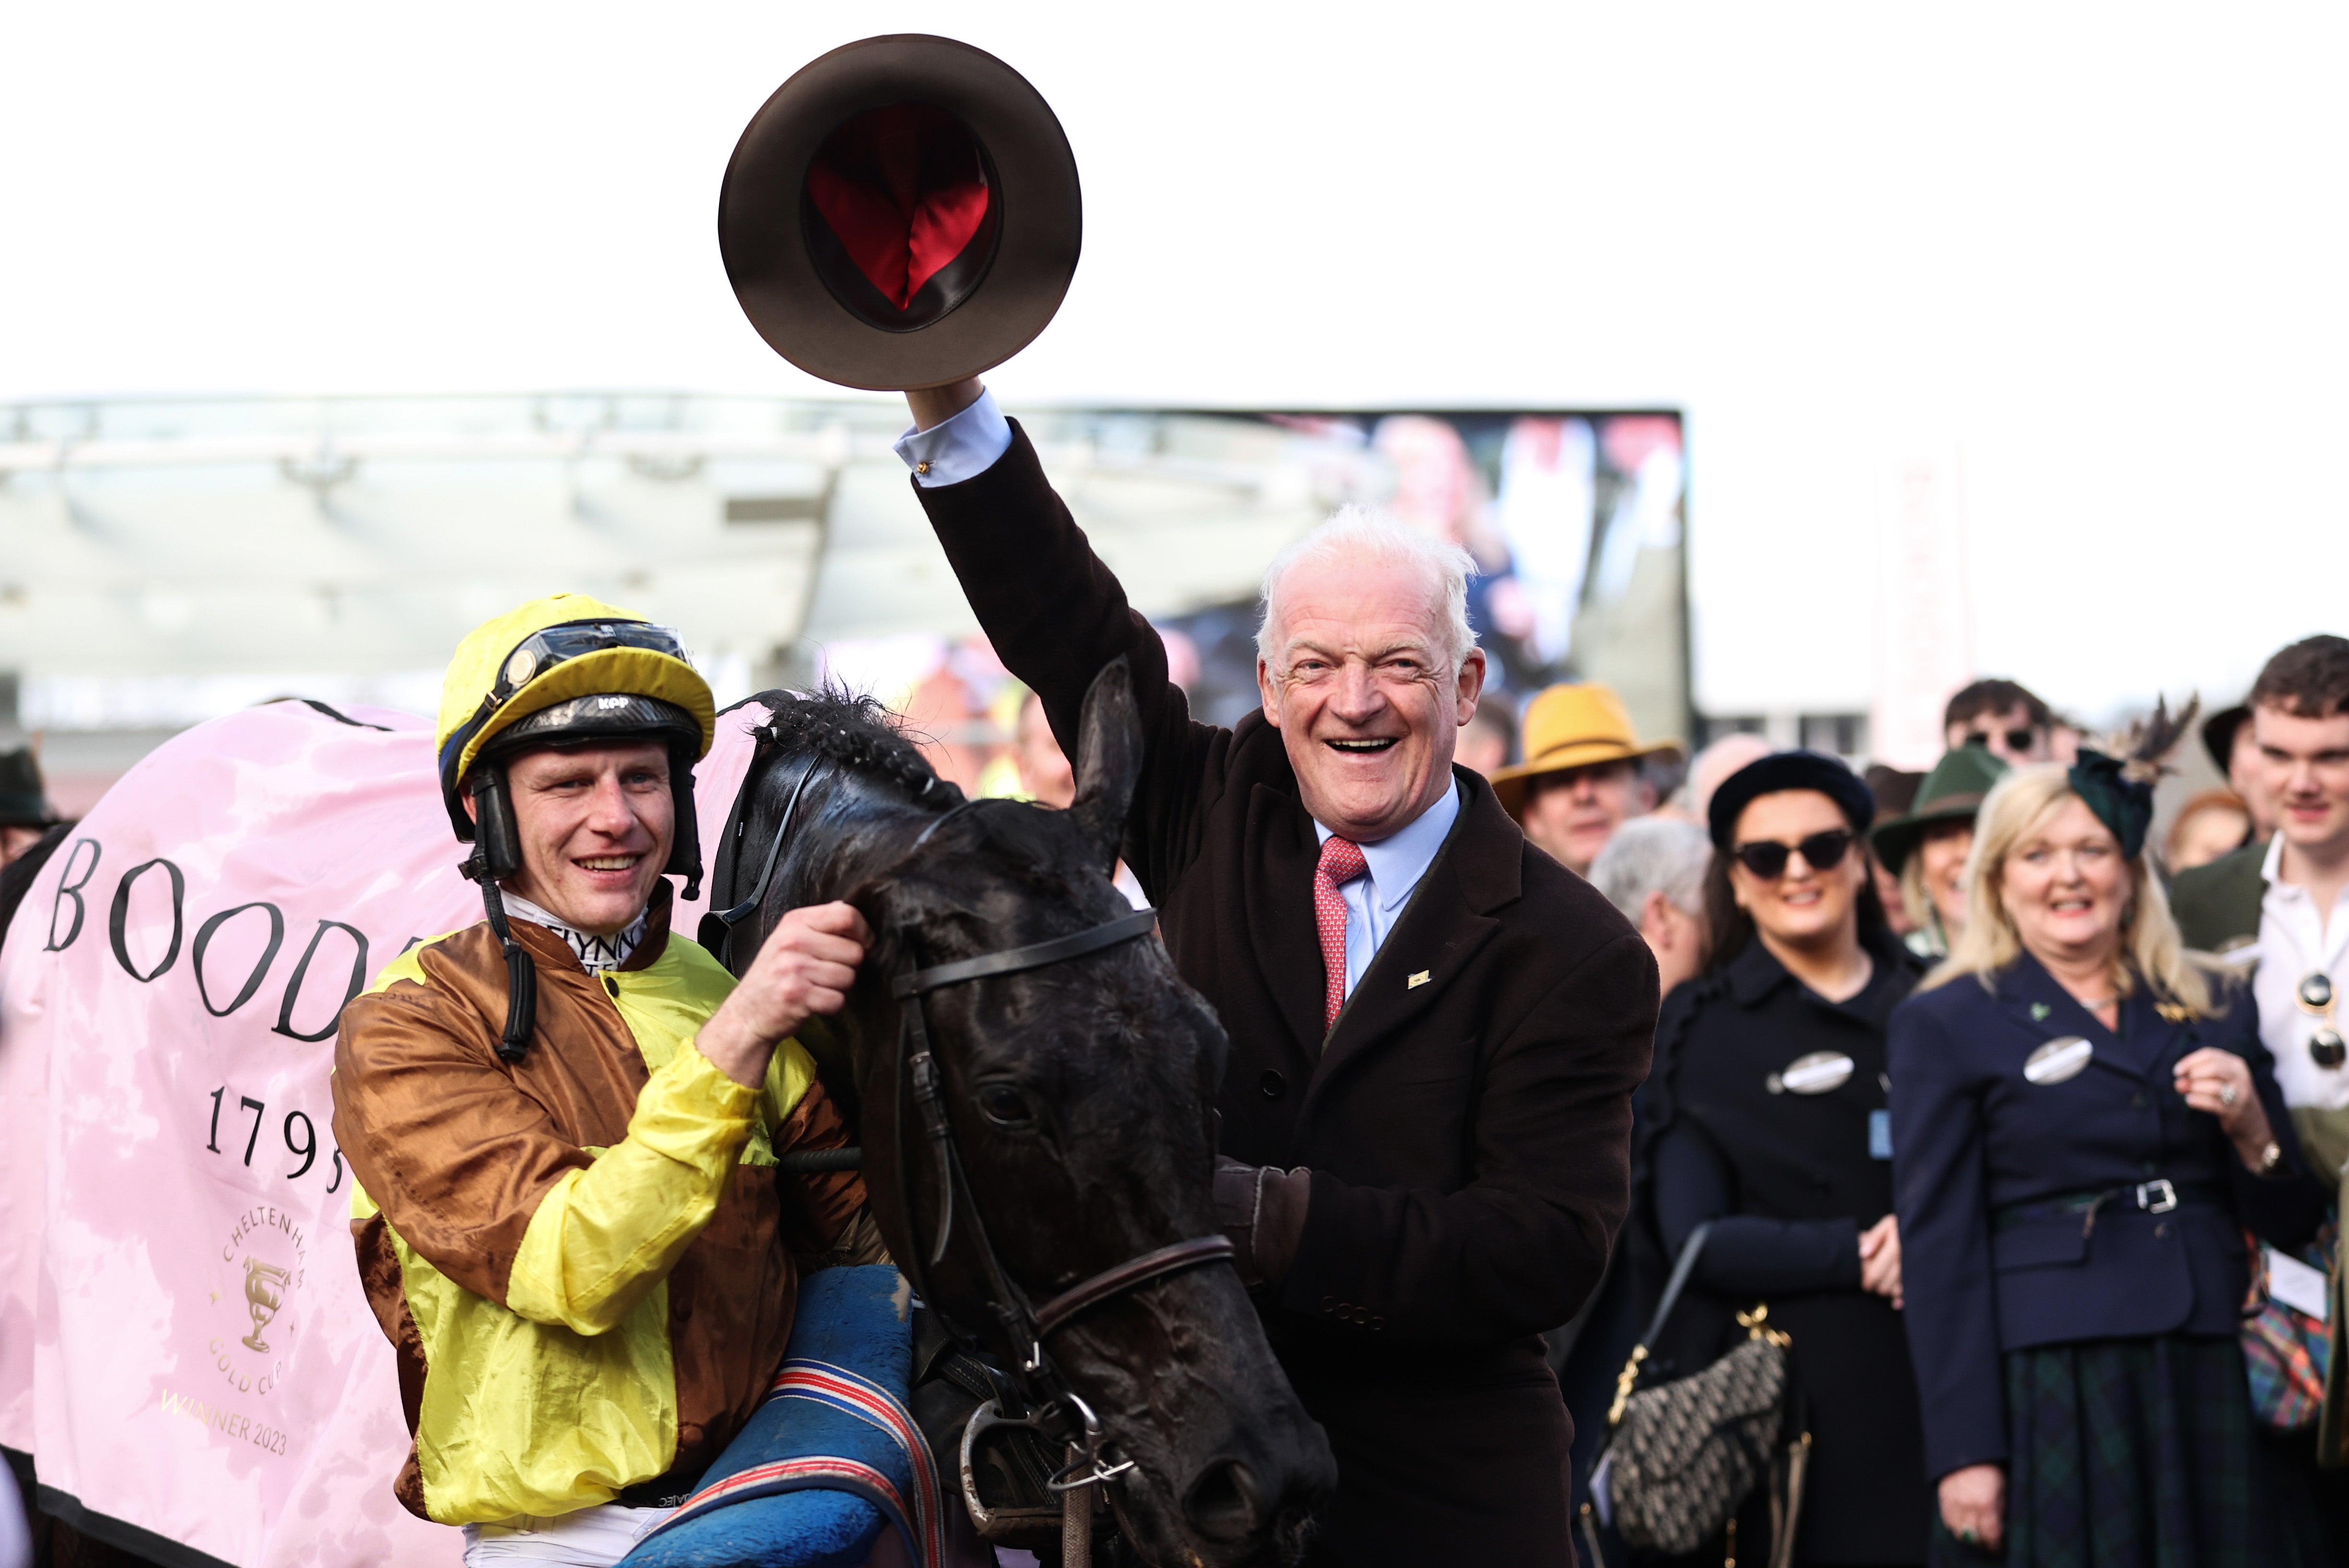 Willie Mullins could reach 100 winners